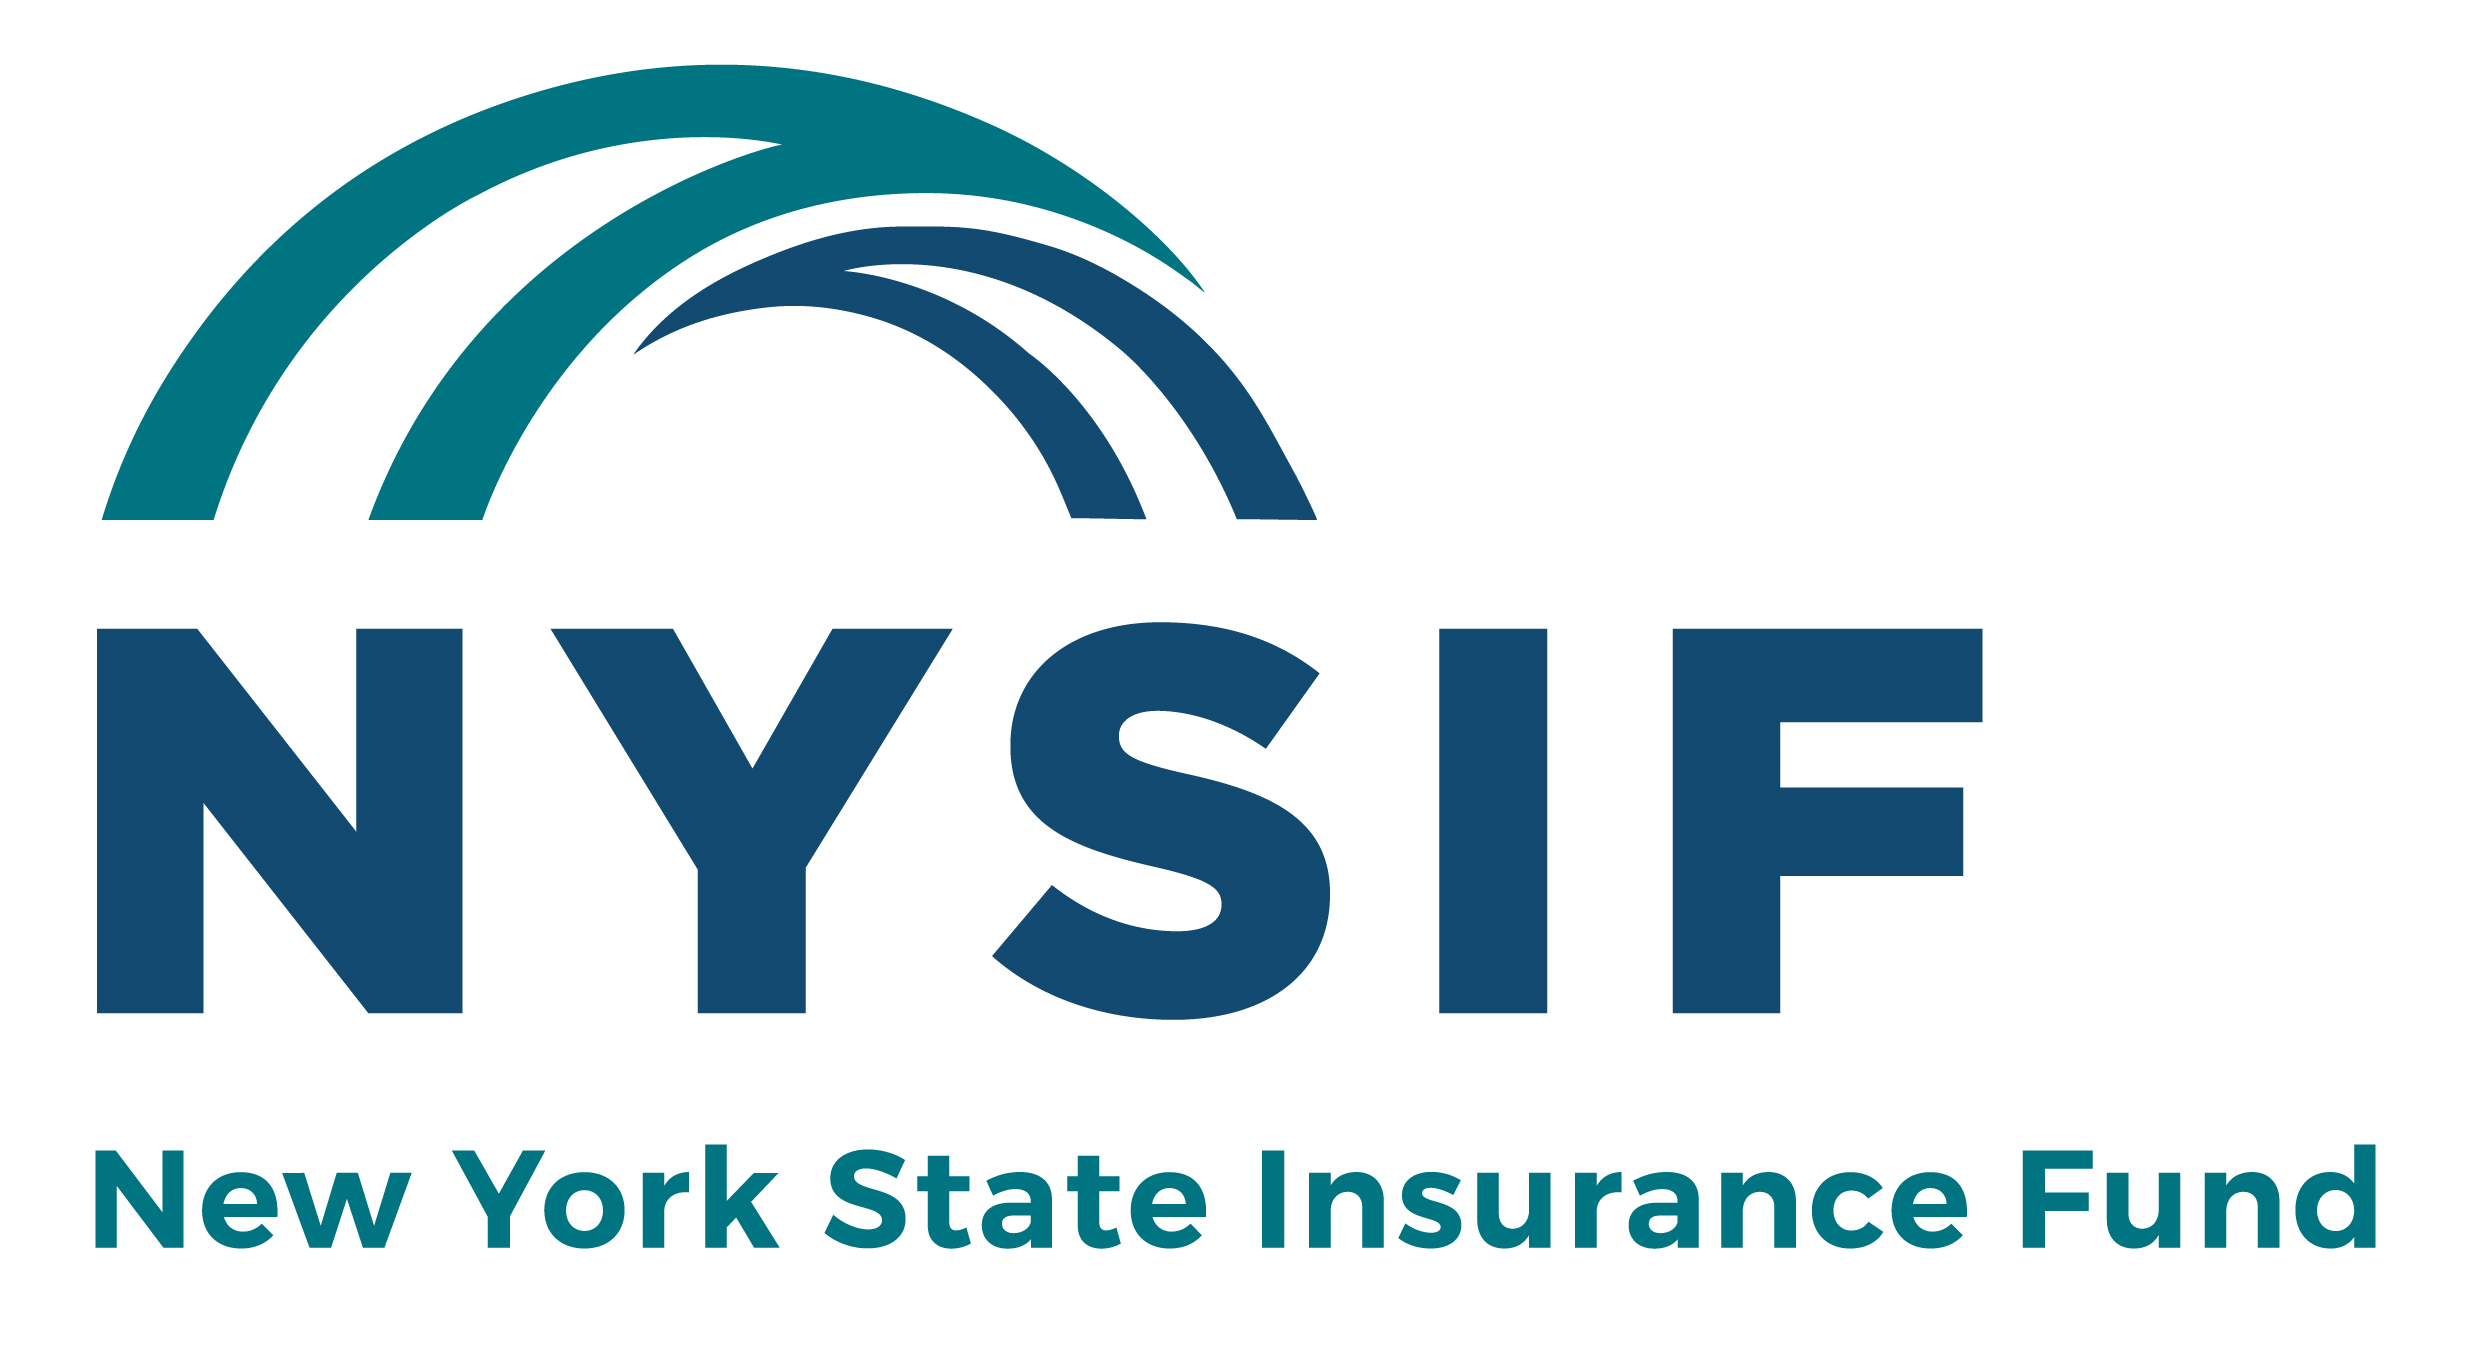 New York State Insurance Fund Offers Coverage to Policyholders' Out-Of-State Workers